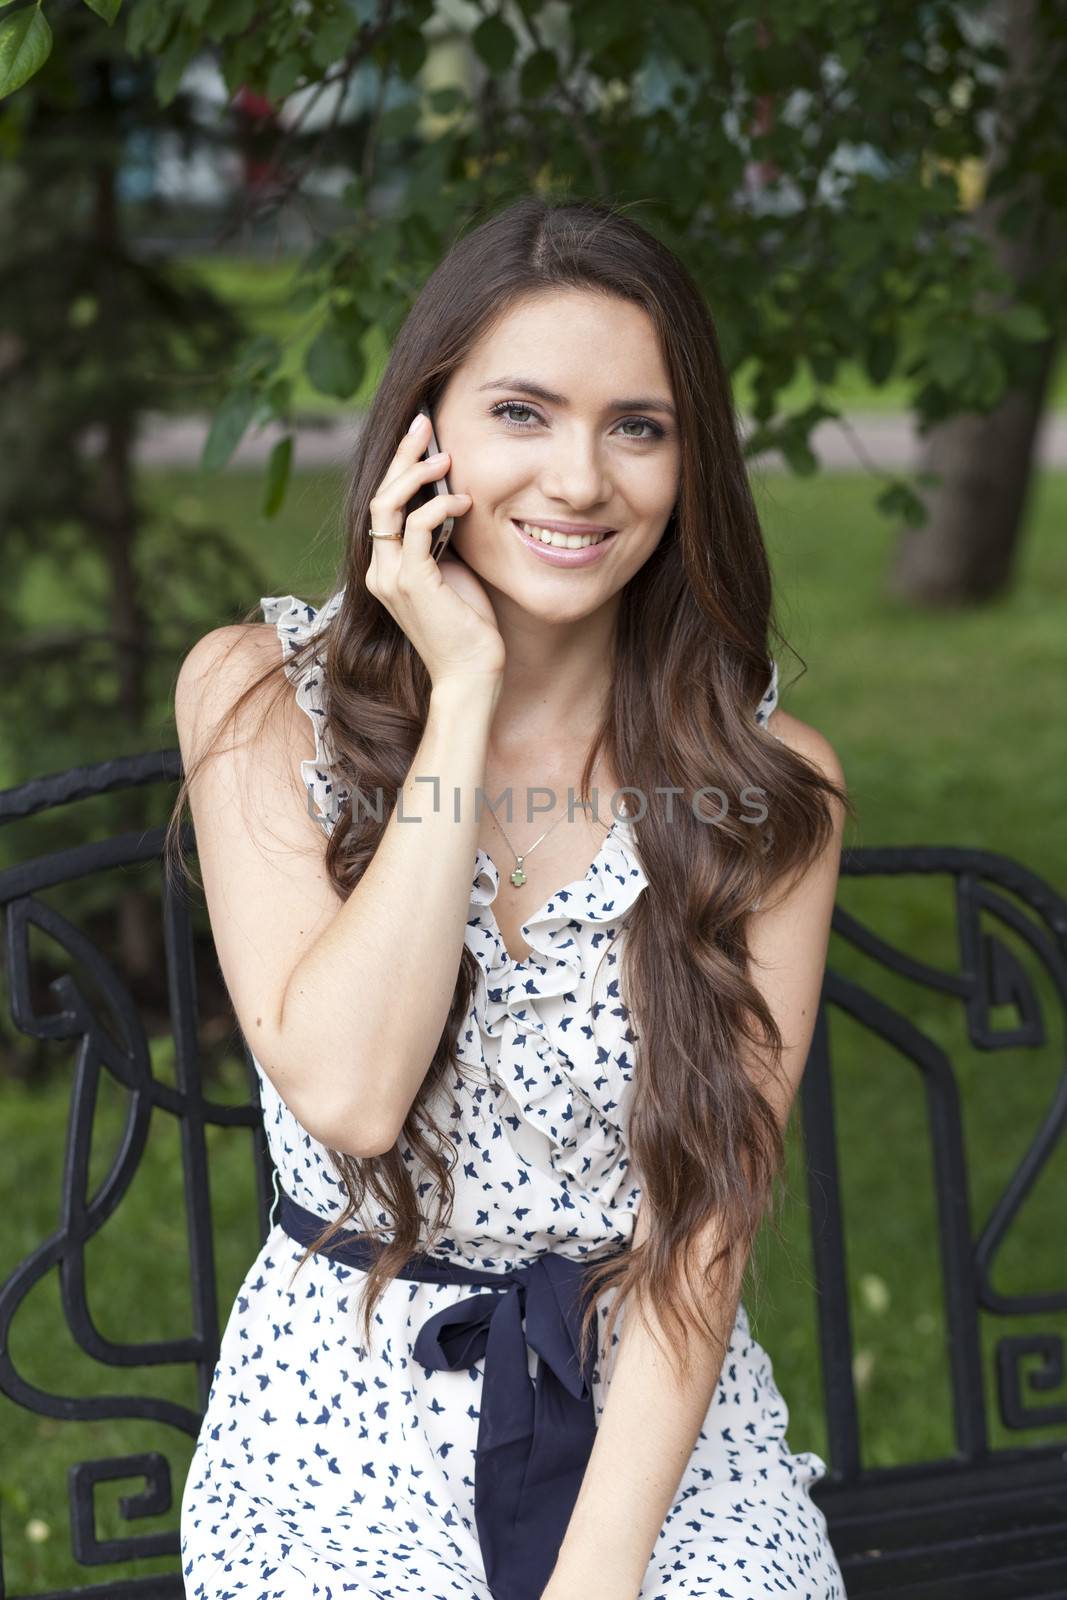 Brunette sitting on a bench in a summer park